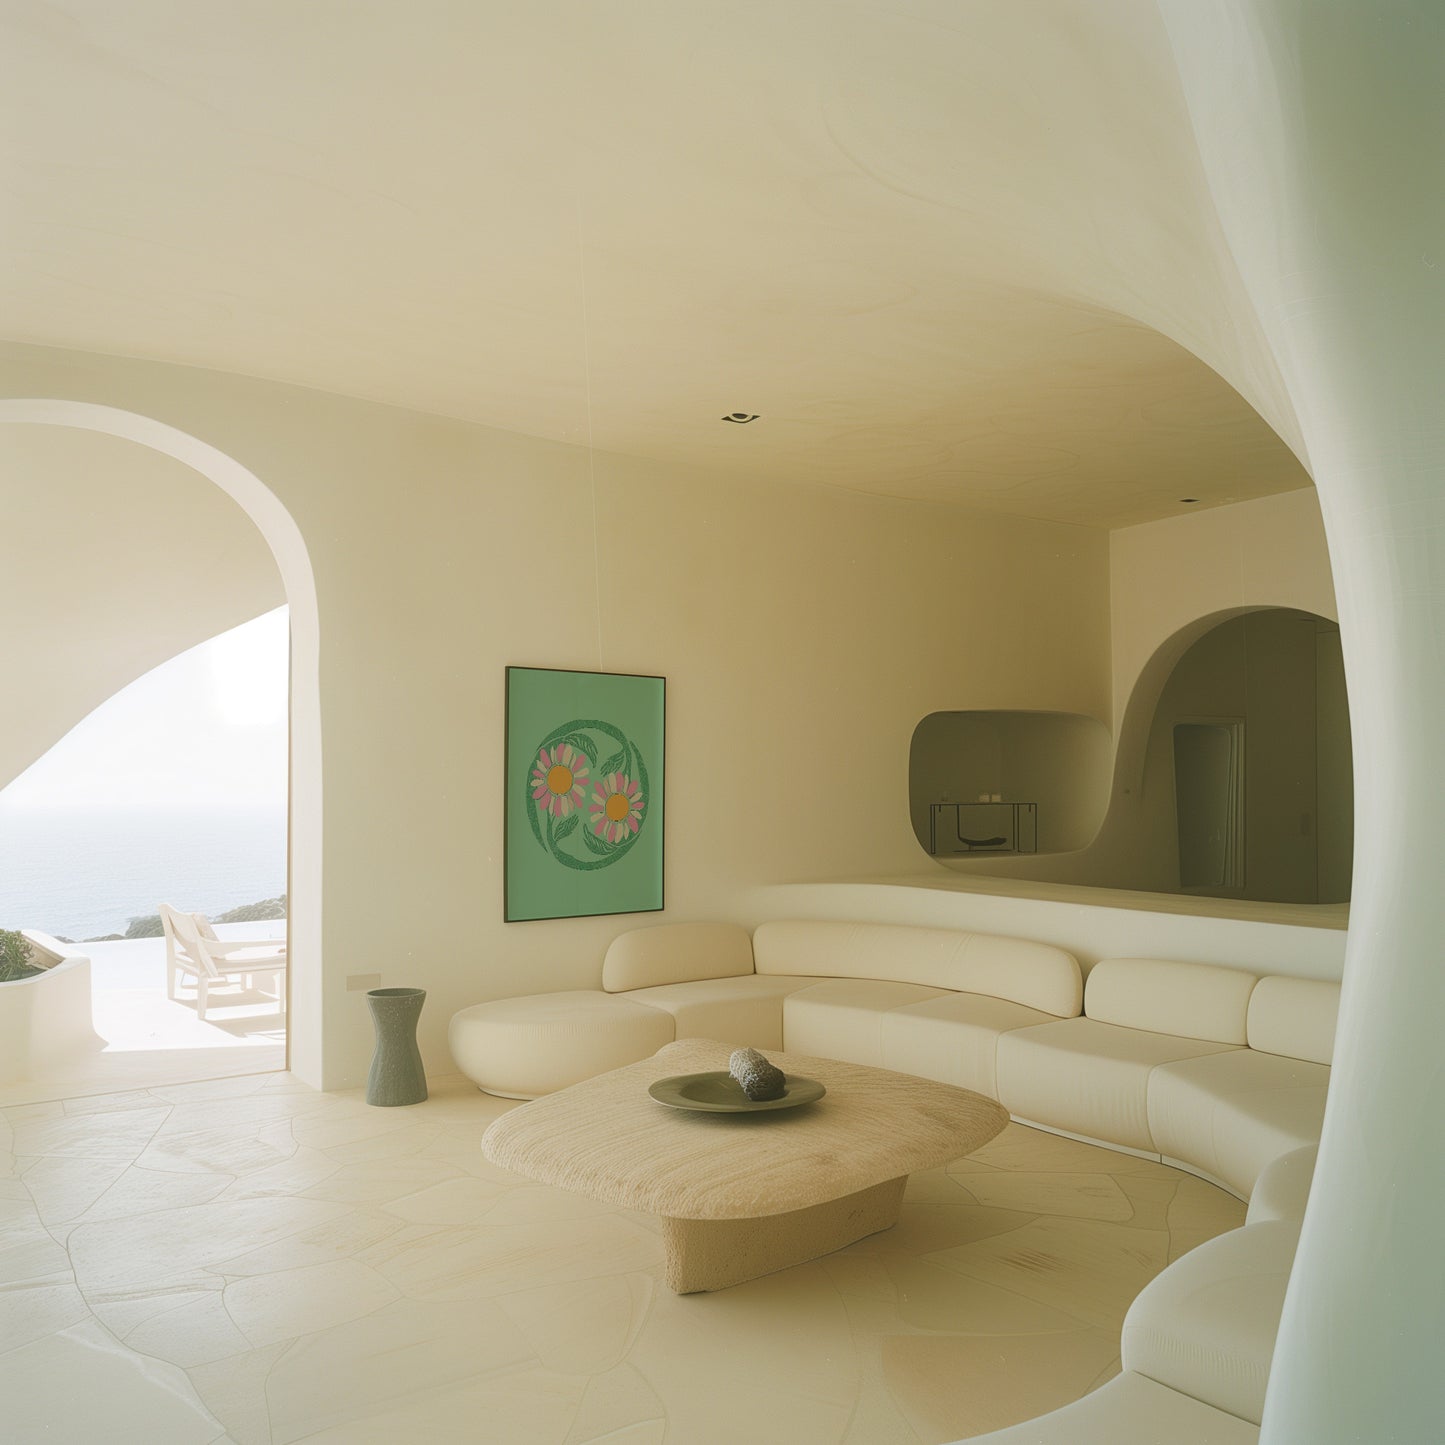 Curvilinear interior with beige sofa, round table, and a framed artwork, opening to a seascape.